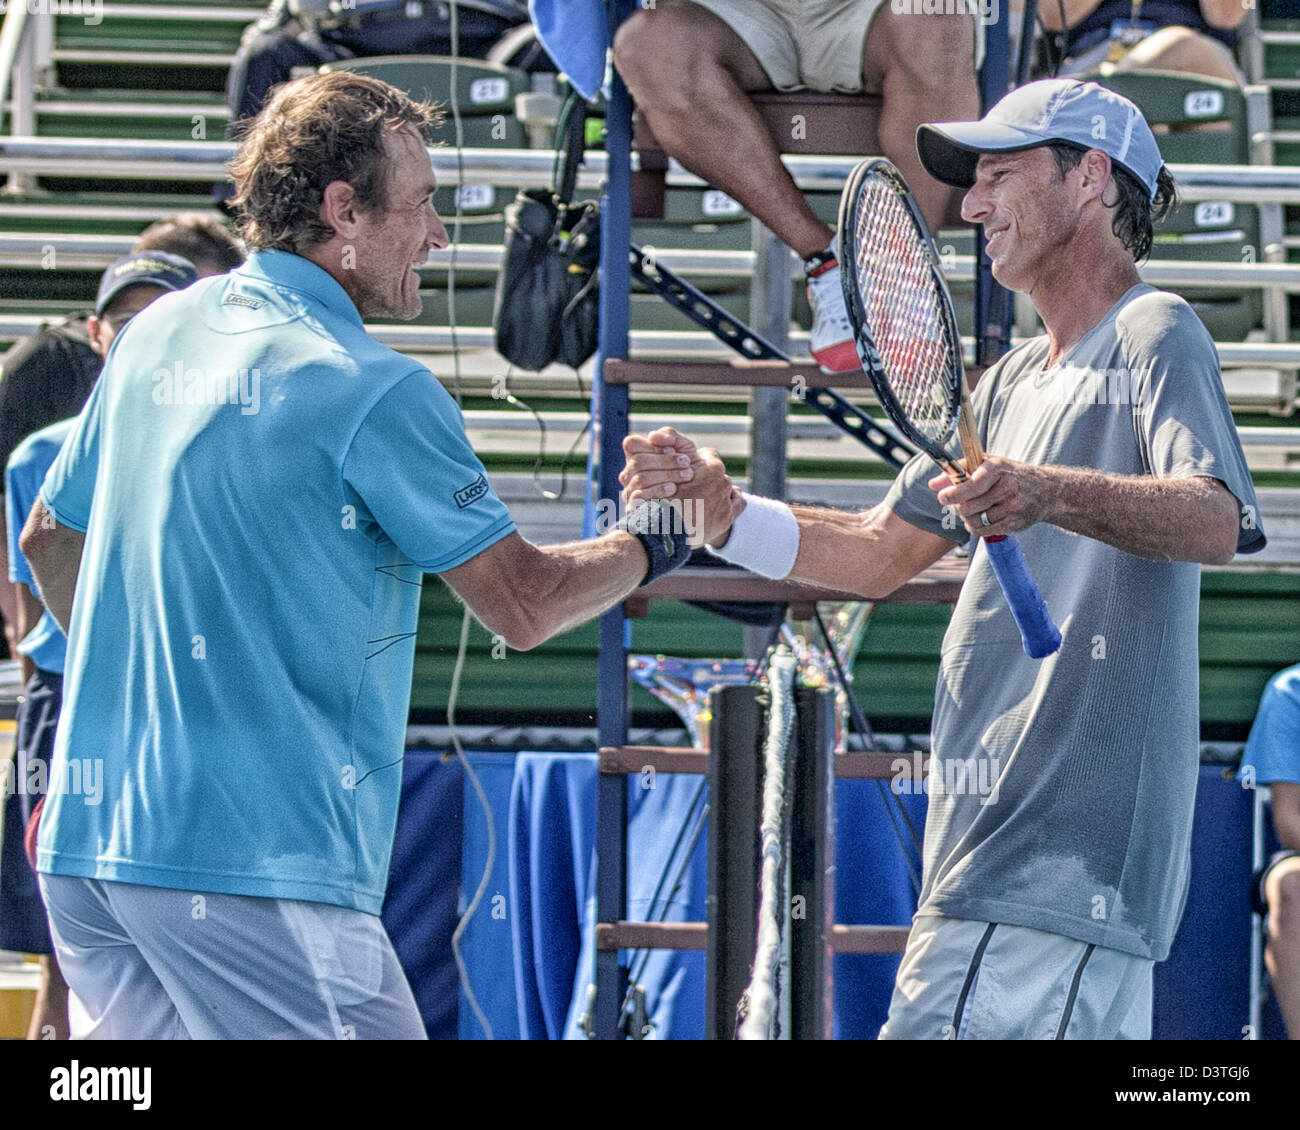 Delray Beach, Florida, USA. 24th February 2013.  Mats Wilander (SWE) at left clasps hands with Aaron Krickstein (USA] after their Champions Tour semifinal match. Krickstein defeated Wilander 4-6, 7-5 (10-5) to take home the third-place trophy. Krickstein, who runs a tennis academy in nearby Boca Raton, won two of his three matches during the three-day event and improved his record to 7-6 at the Delray Beach ITC. The International Tennis Championships is an ATP World Tour 250 series men's tennis tournament held every year in Delray Beach, Florida. (Credit Image: © Arnold Drapkin/ZUMAPRESS.com/A Stock Photo